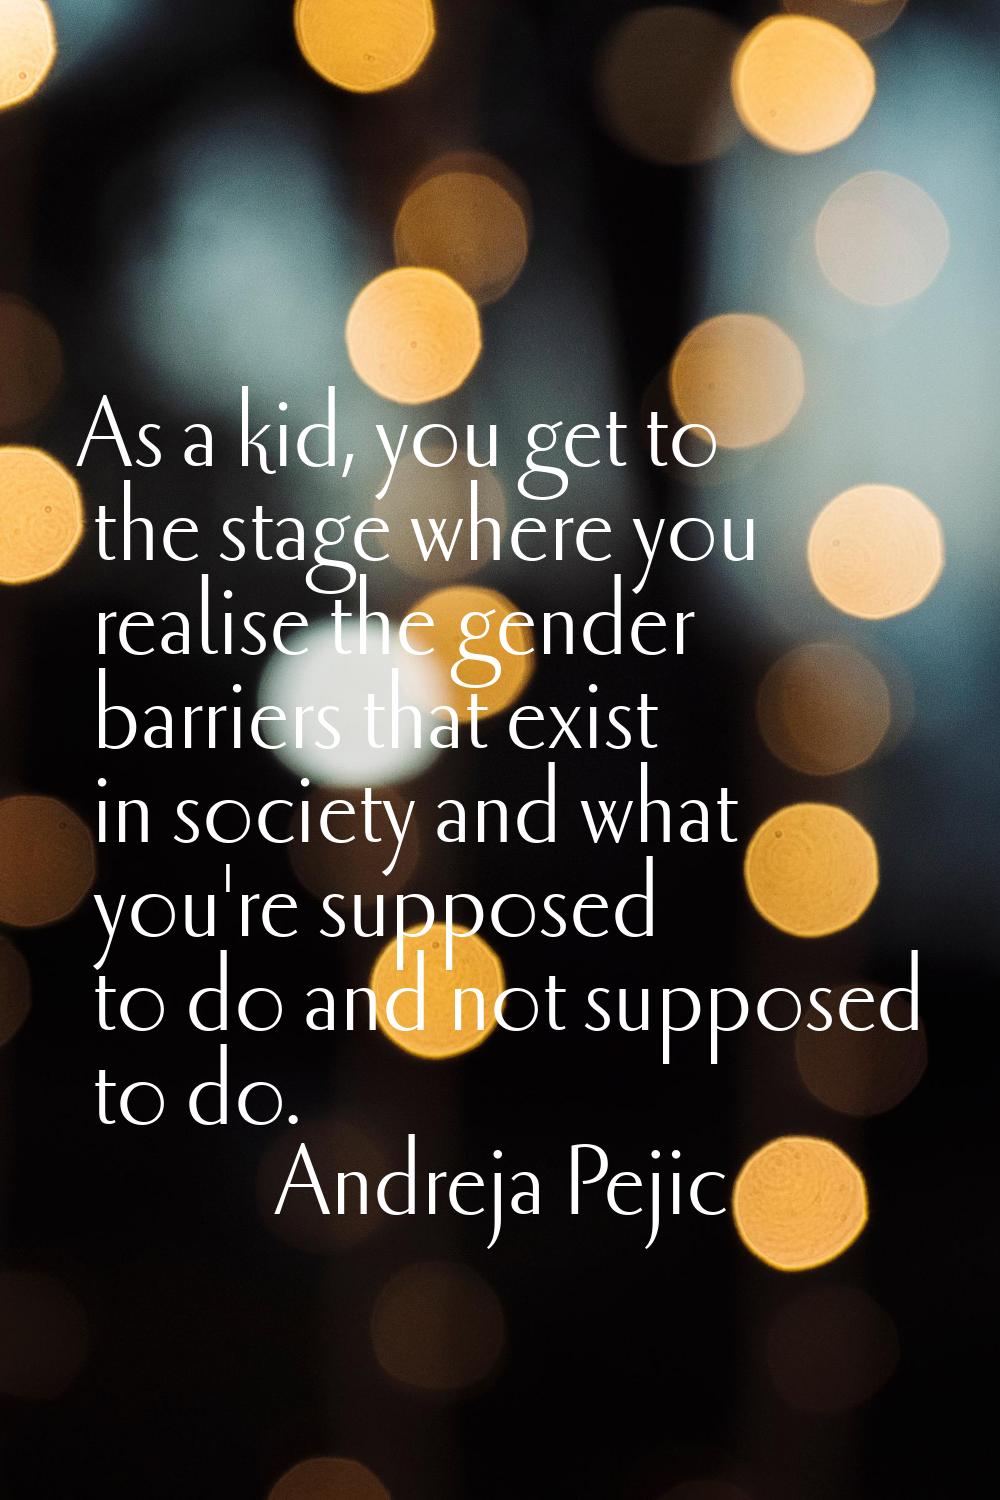 As a kid, you get to the stage where you realise the gender barriers that exist in society and what